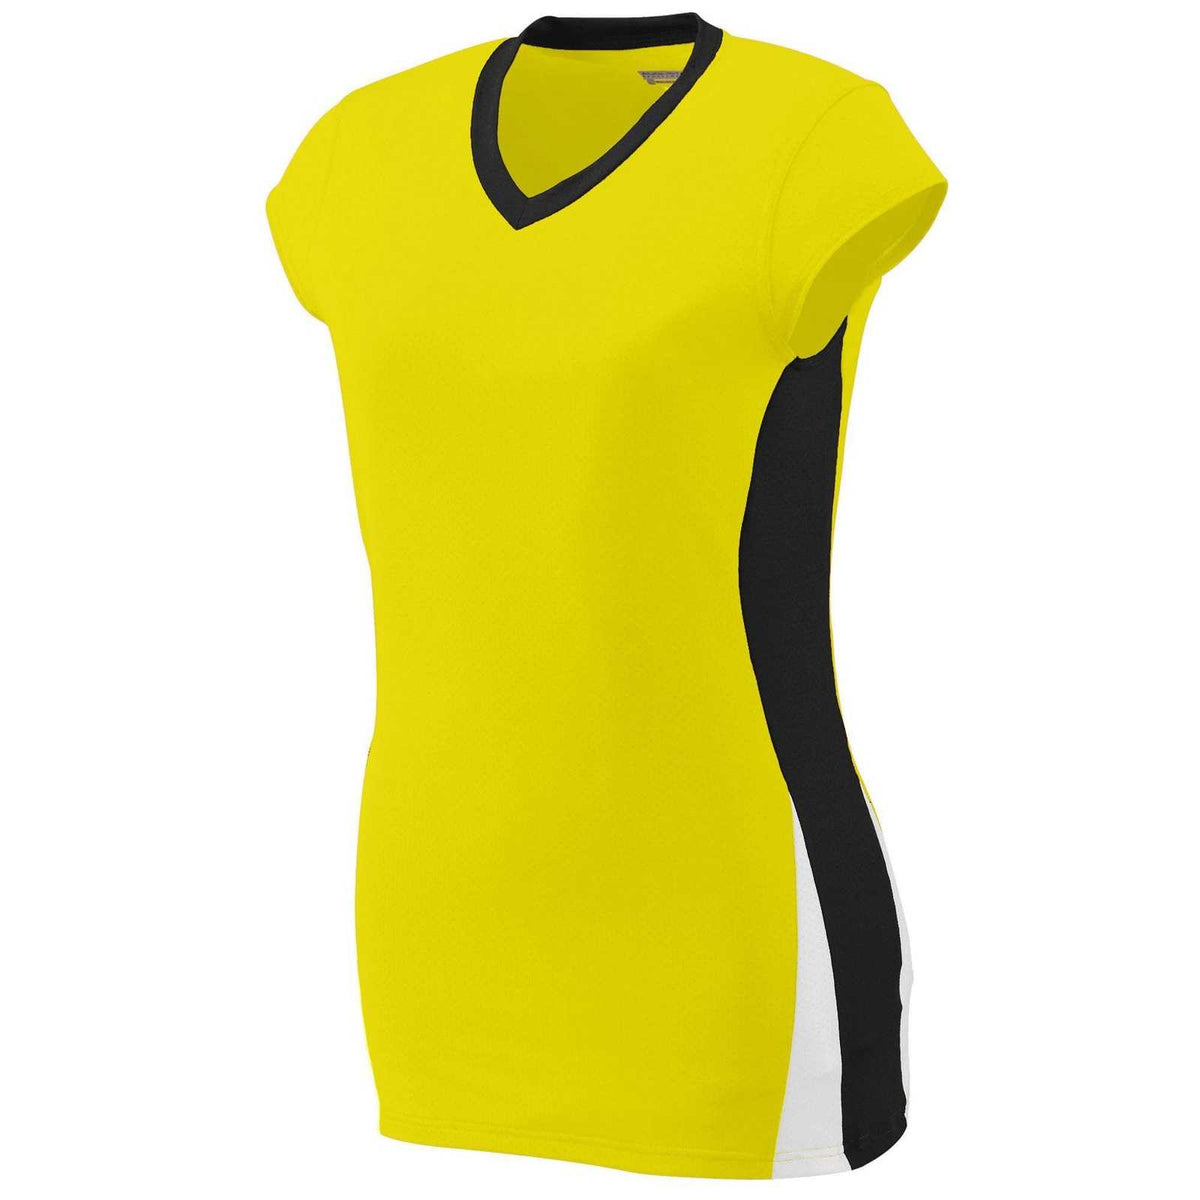 Augusta 1311 Girls Hit Jersey - Power Yellow Black White - HIT a Double